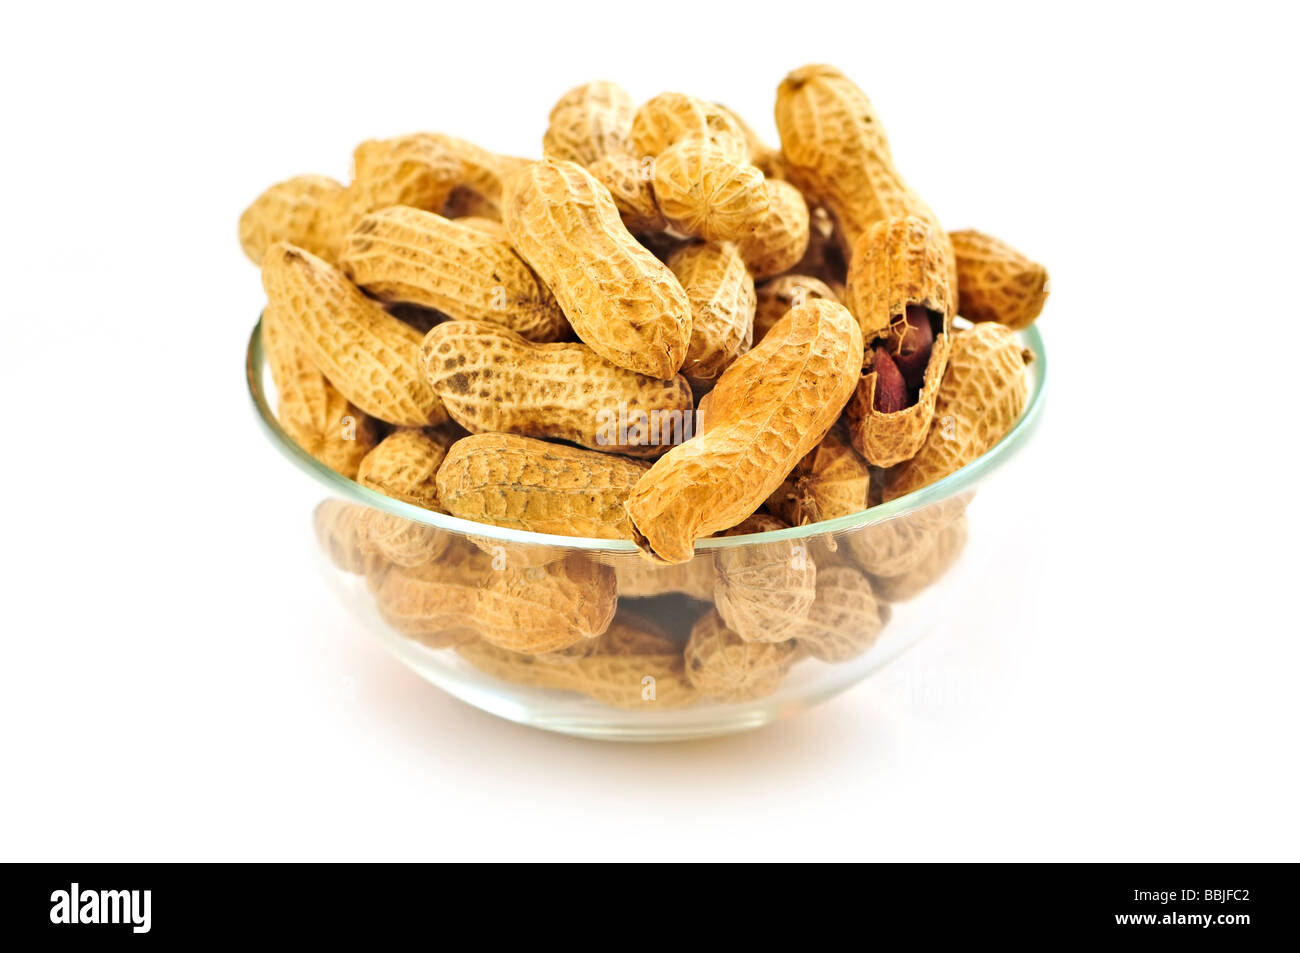 Closeup on bowl of peanuts with shells Stock Photo